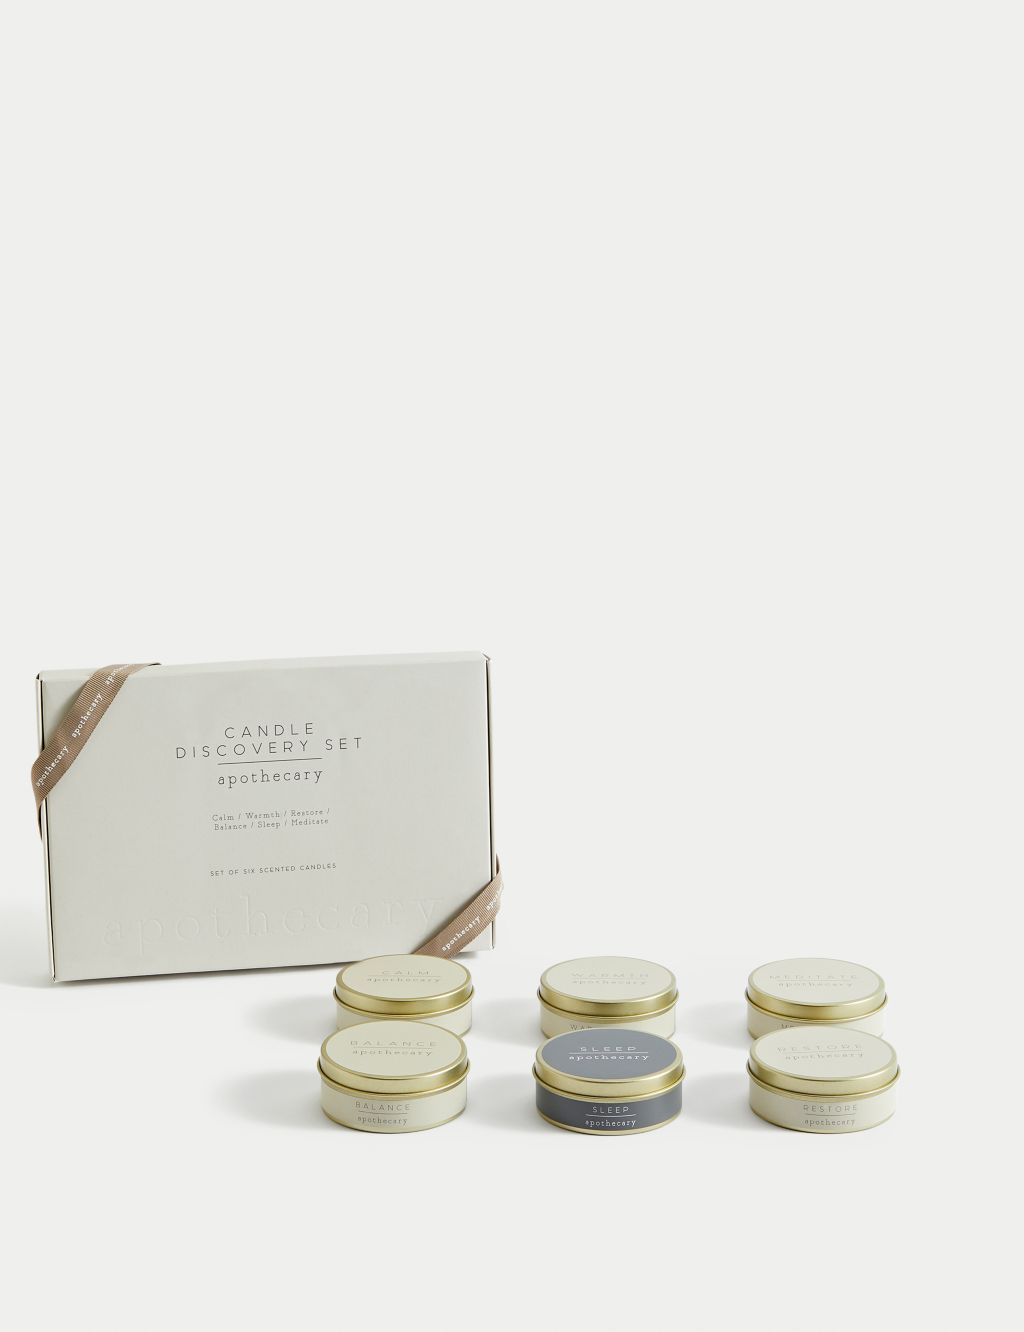 Apothecary Candle Discovery Gift Set